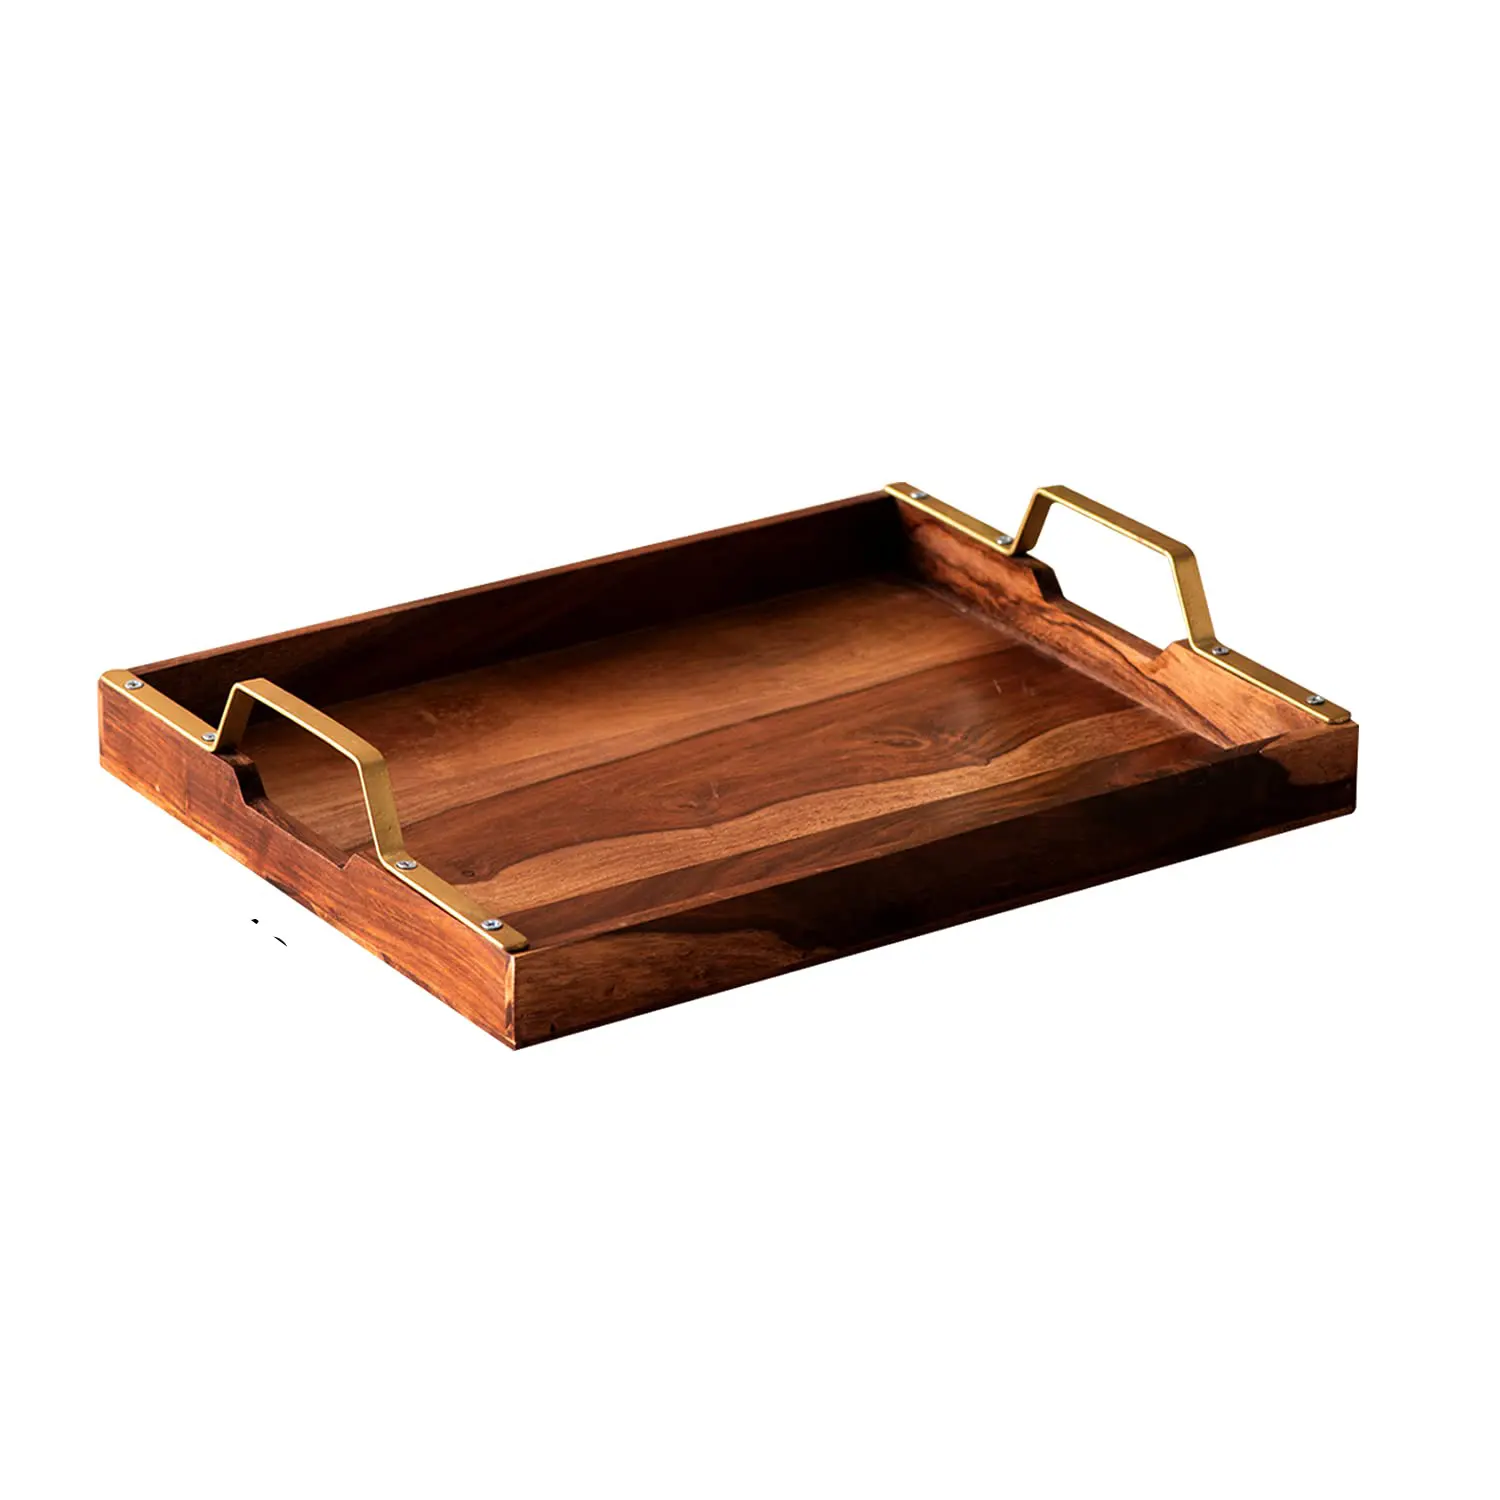 Wooden Plate Tray for Kitchen Tea Tray for Serving Fancy with Gold Handle